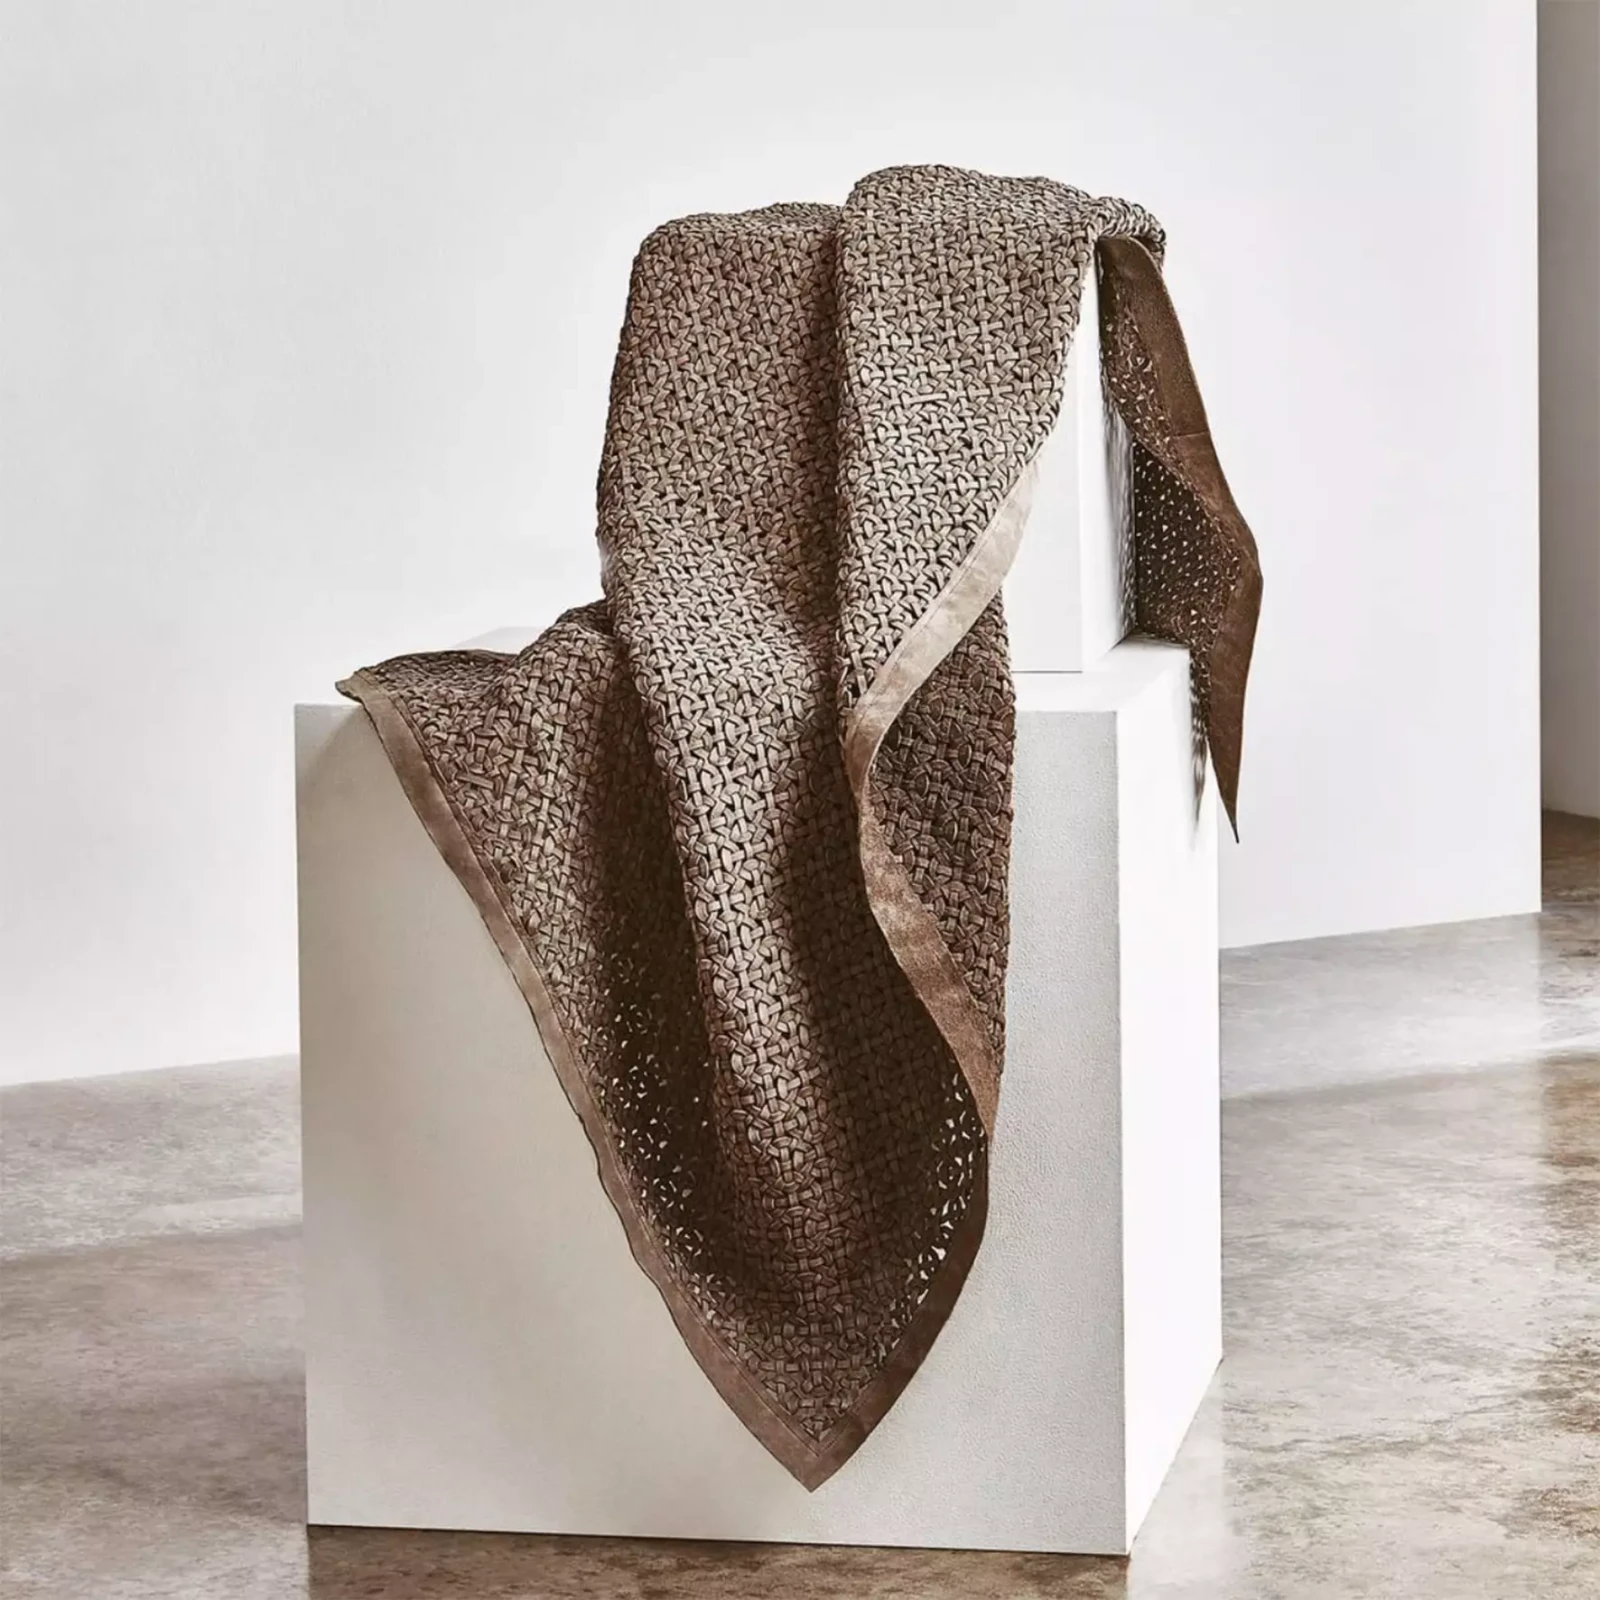 Kelly Hoppen / Chainmail